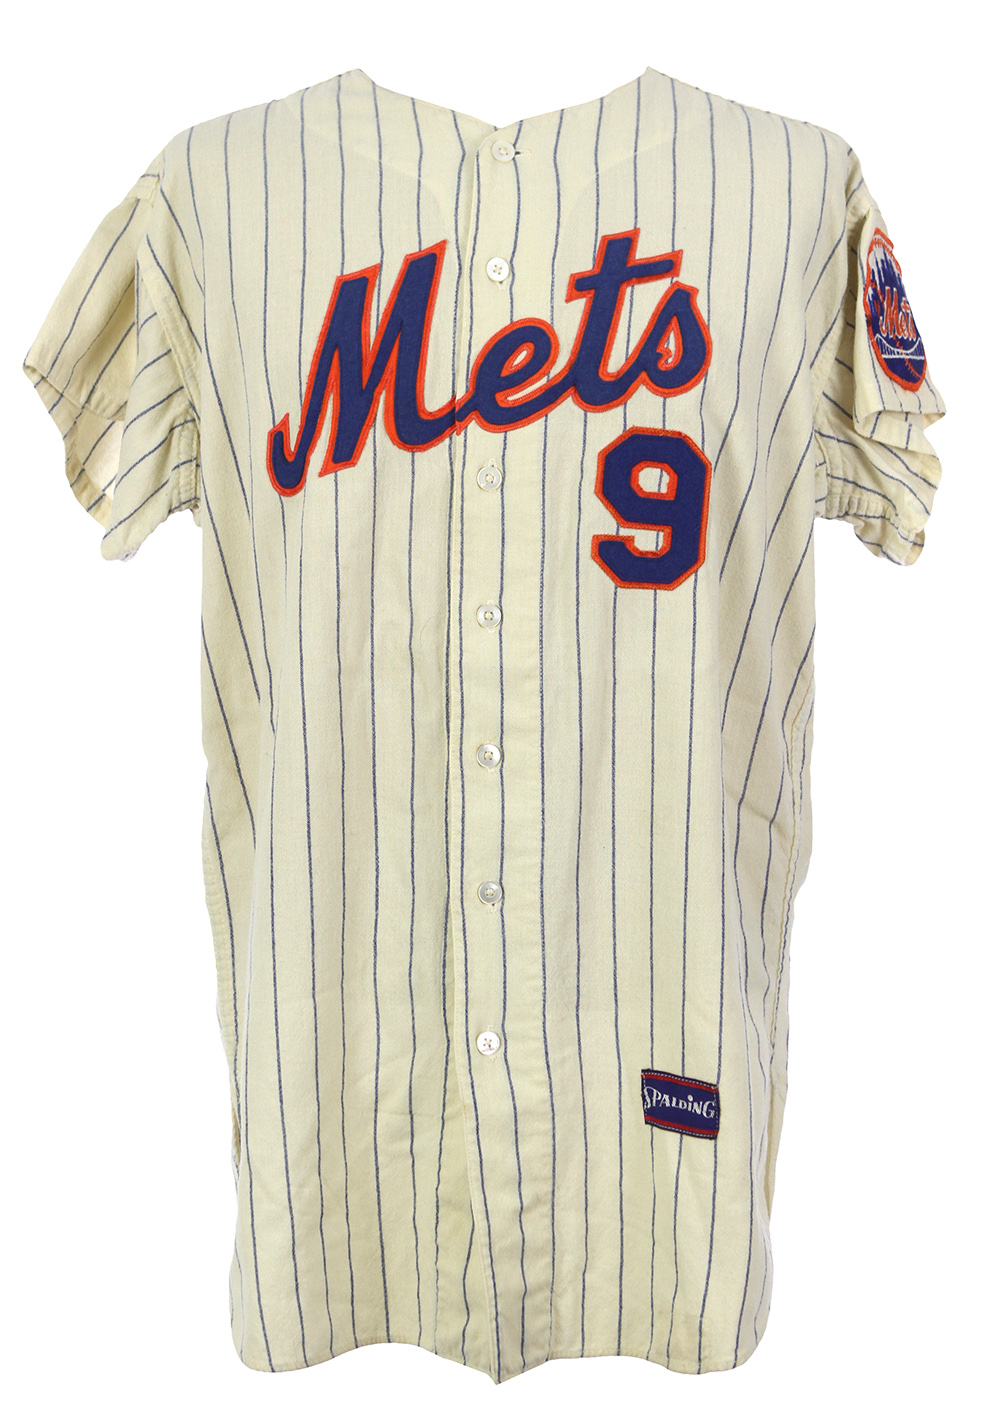 NY Mets to wear new pinstriped home uniforms for 2010 